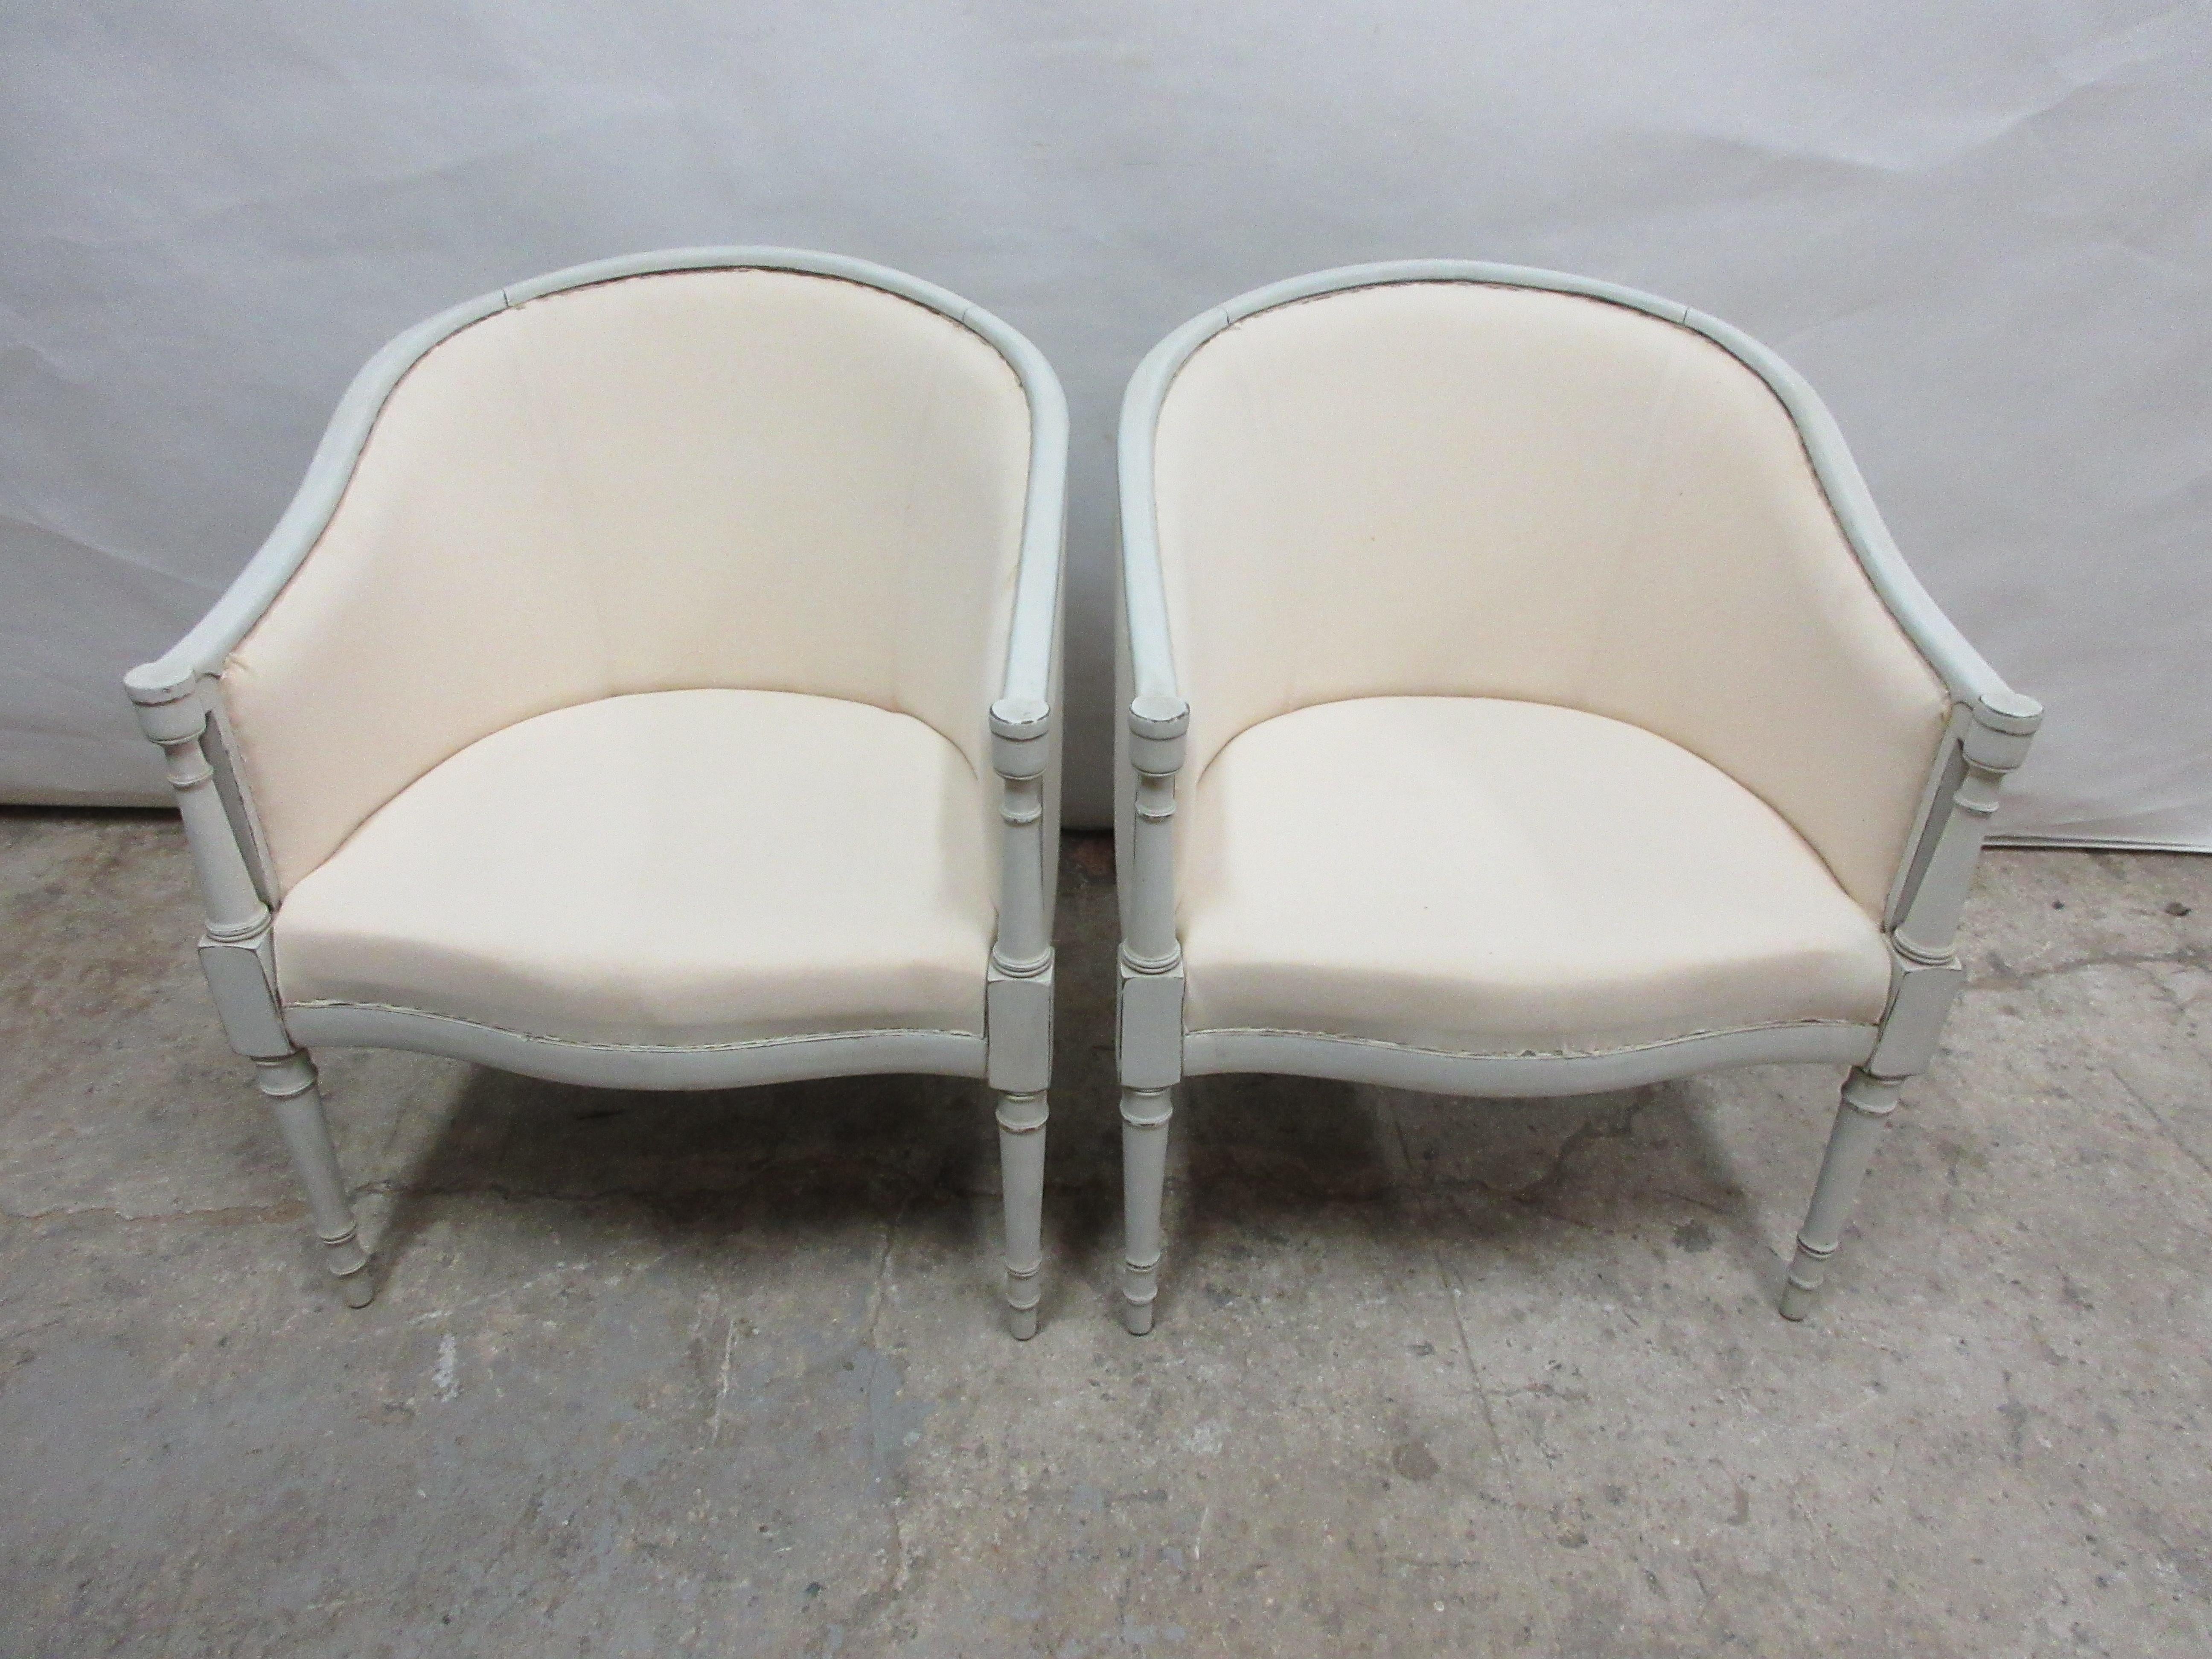 This is a set of 2 Swedish Gustavian barrel chairs. They have been restored and repainted with milk paints 